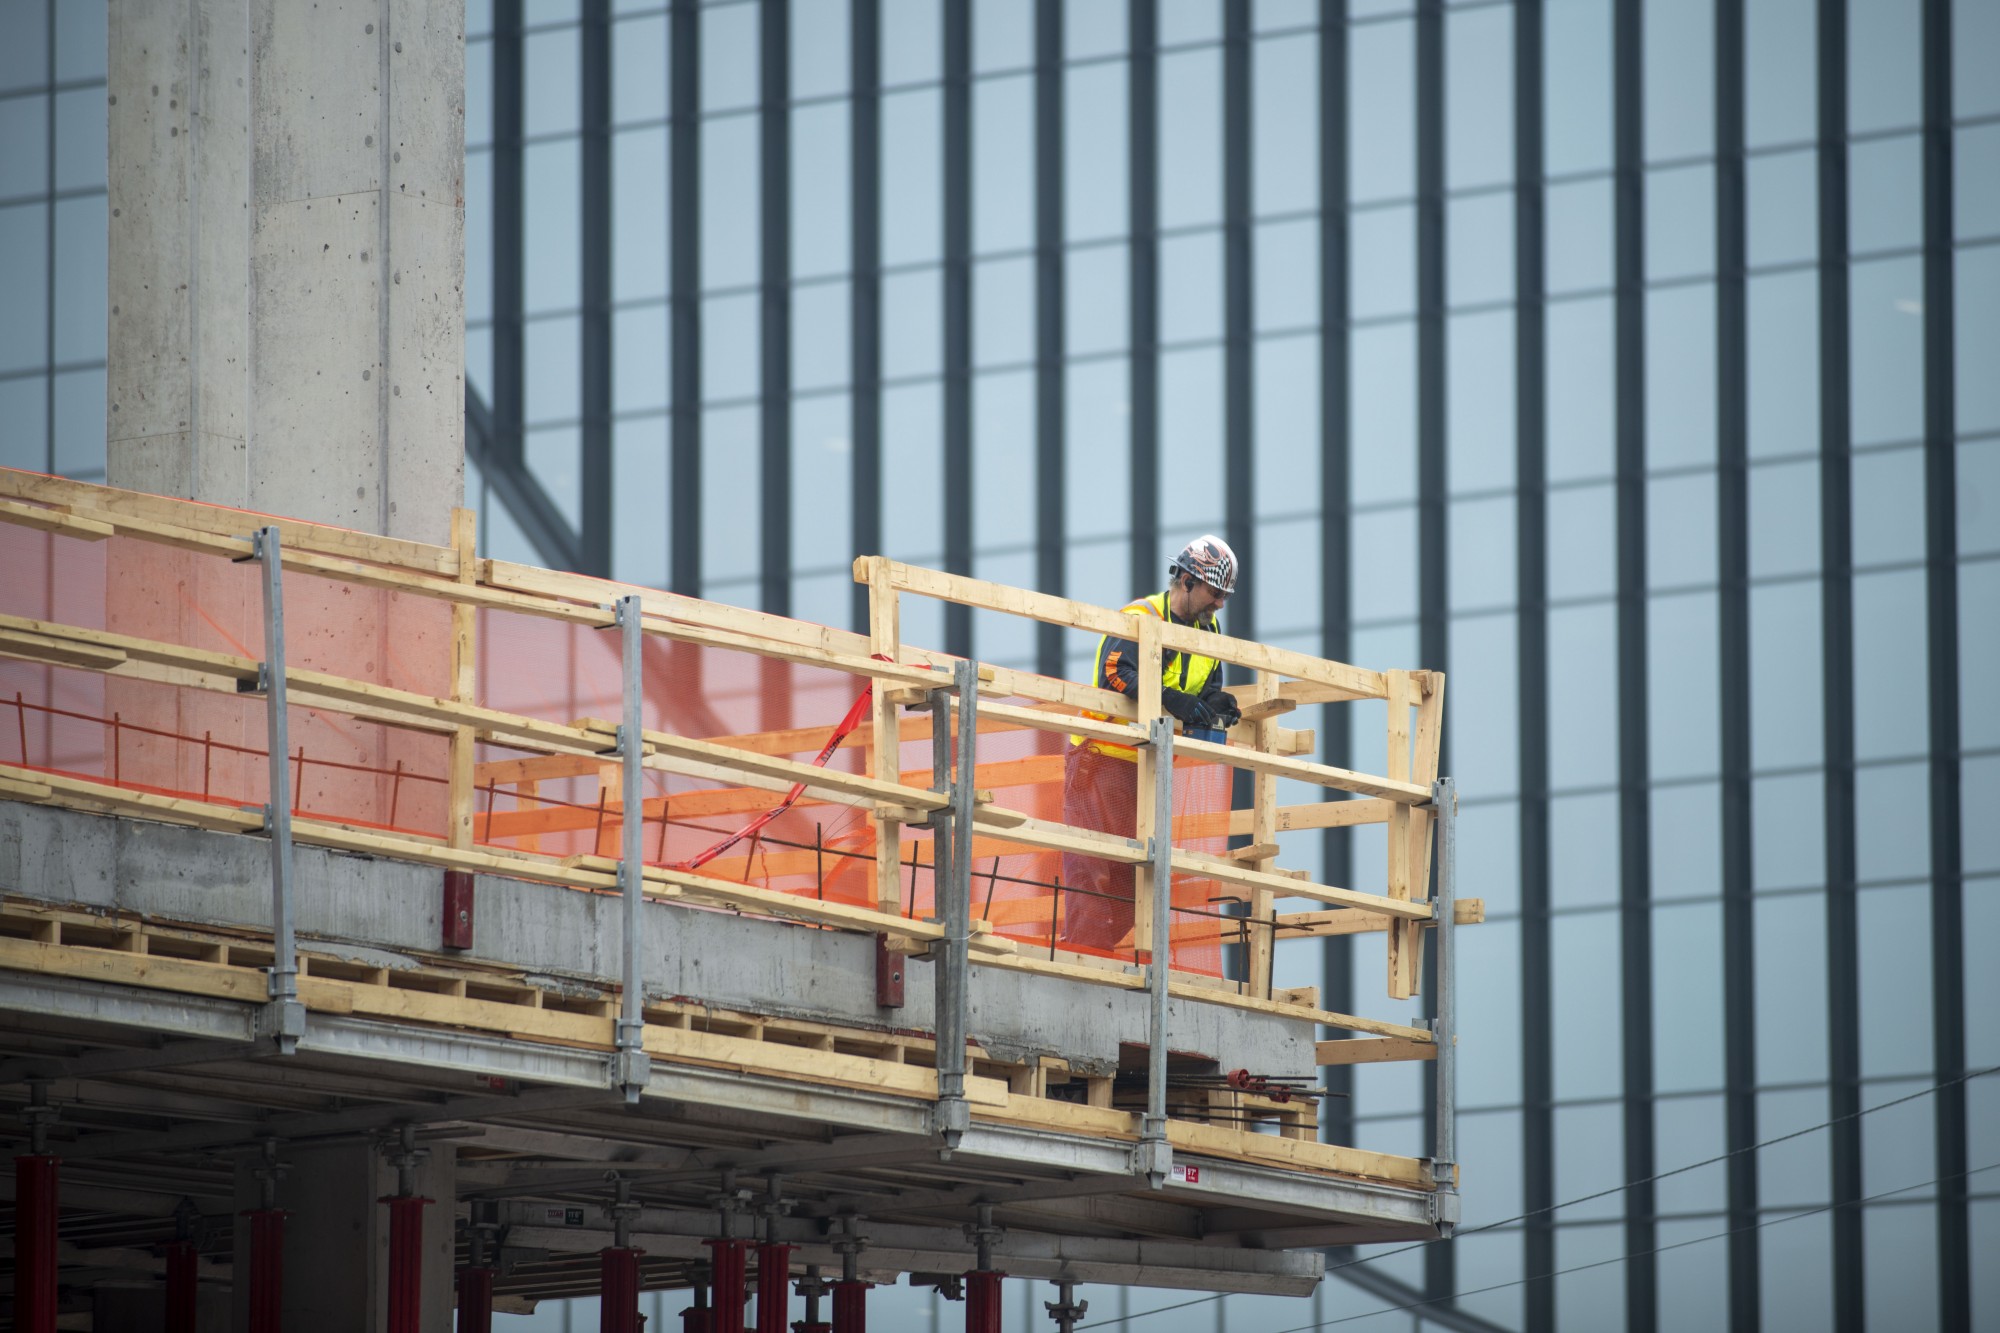 Construction is conducted in Minneapolis on Monday, April 6. Many developments could be put on hold as policymakers try to decrease COVID-19’s spread.